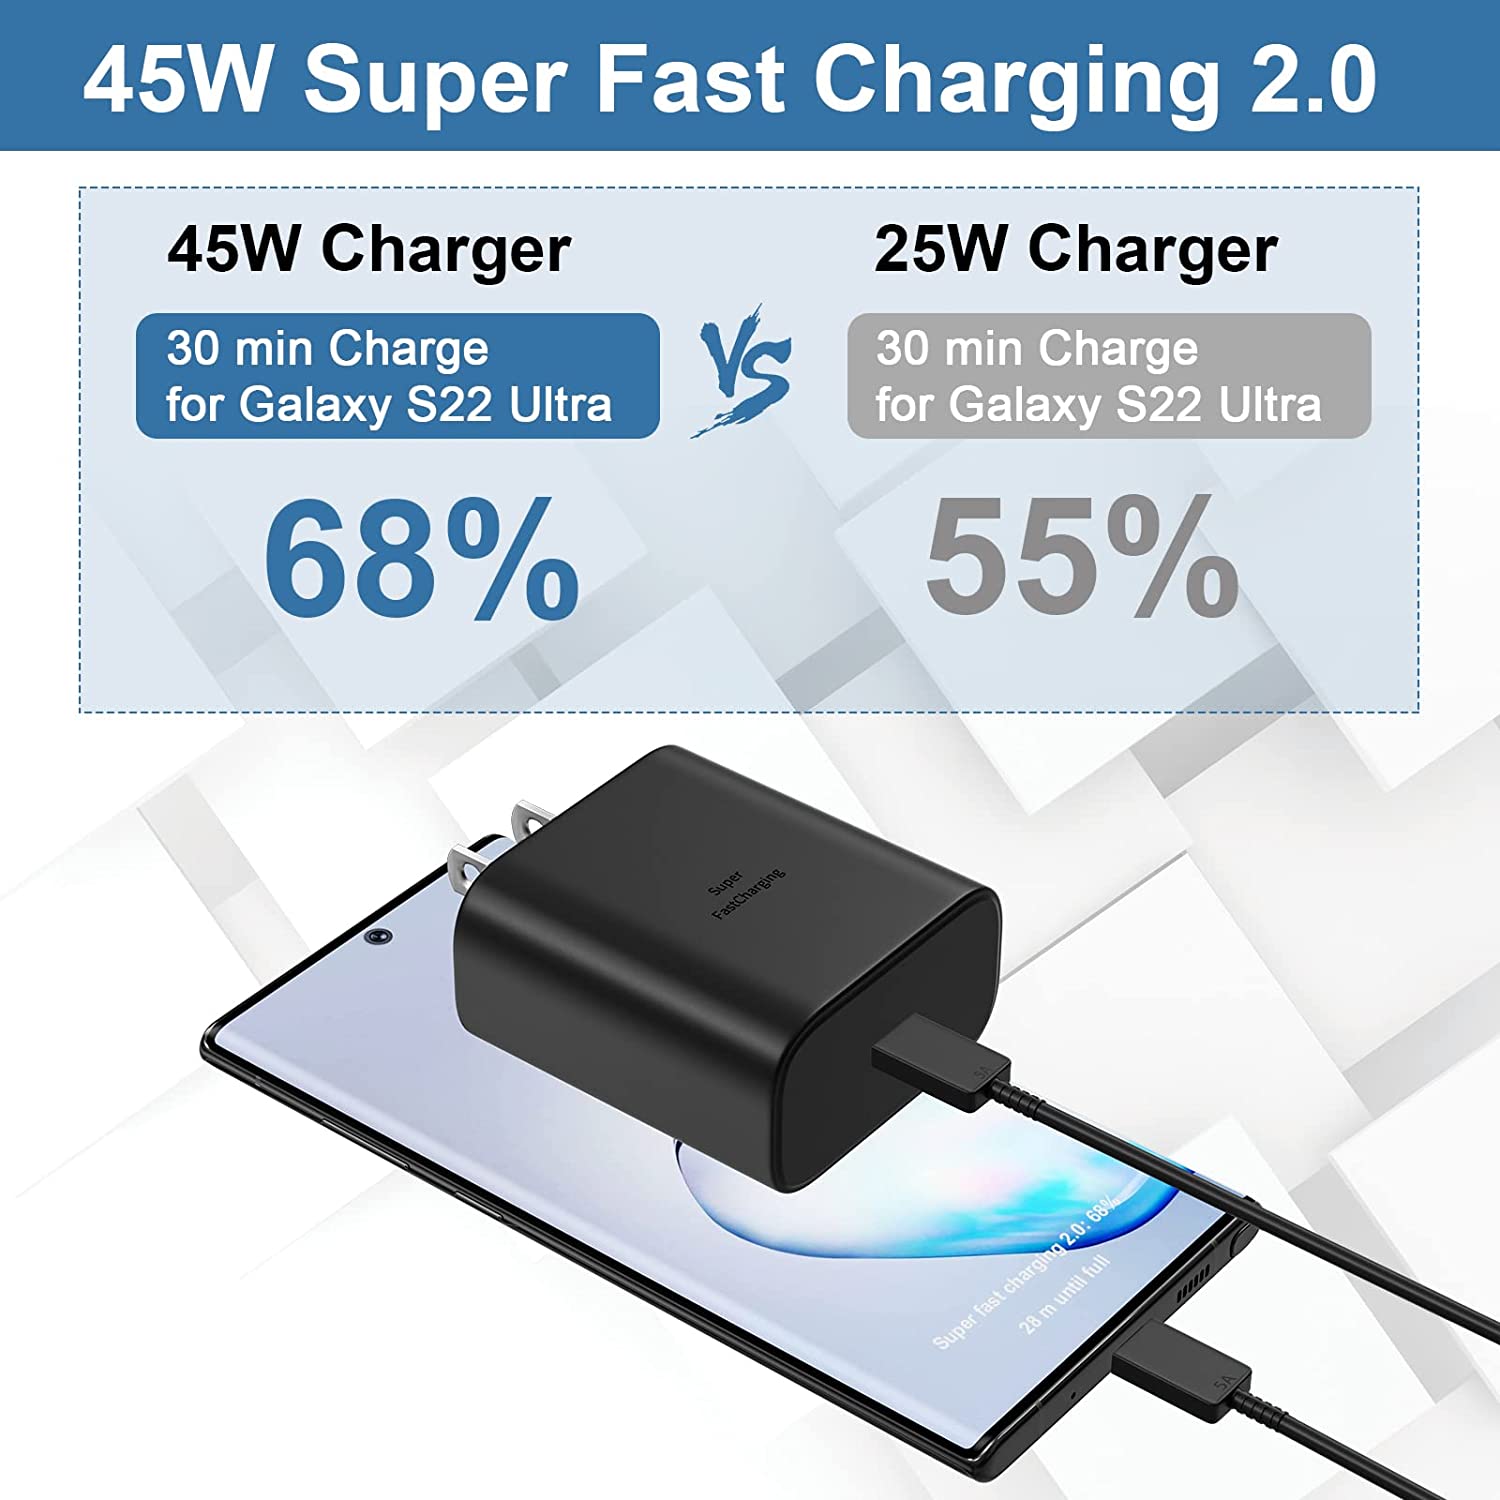 for Huawei P30 Pro New Edition 45W USB-C Super Fast Charging Wall Charger with USB C Cable - Black - image 3 of 5